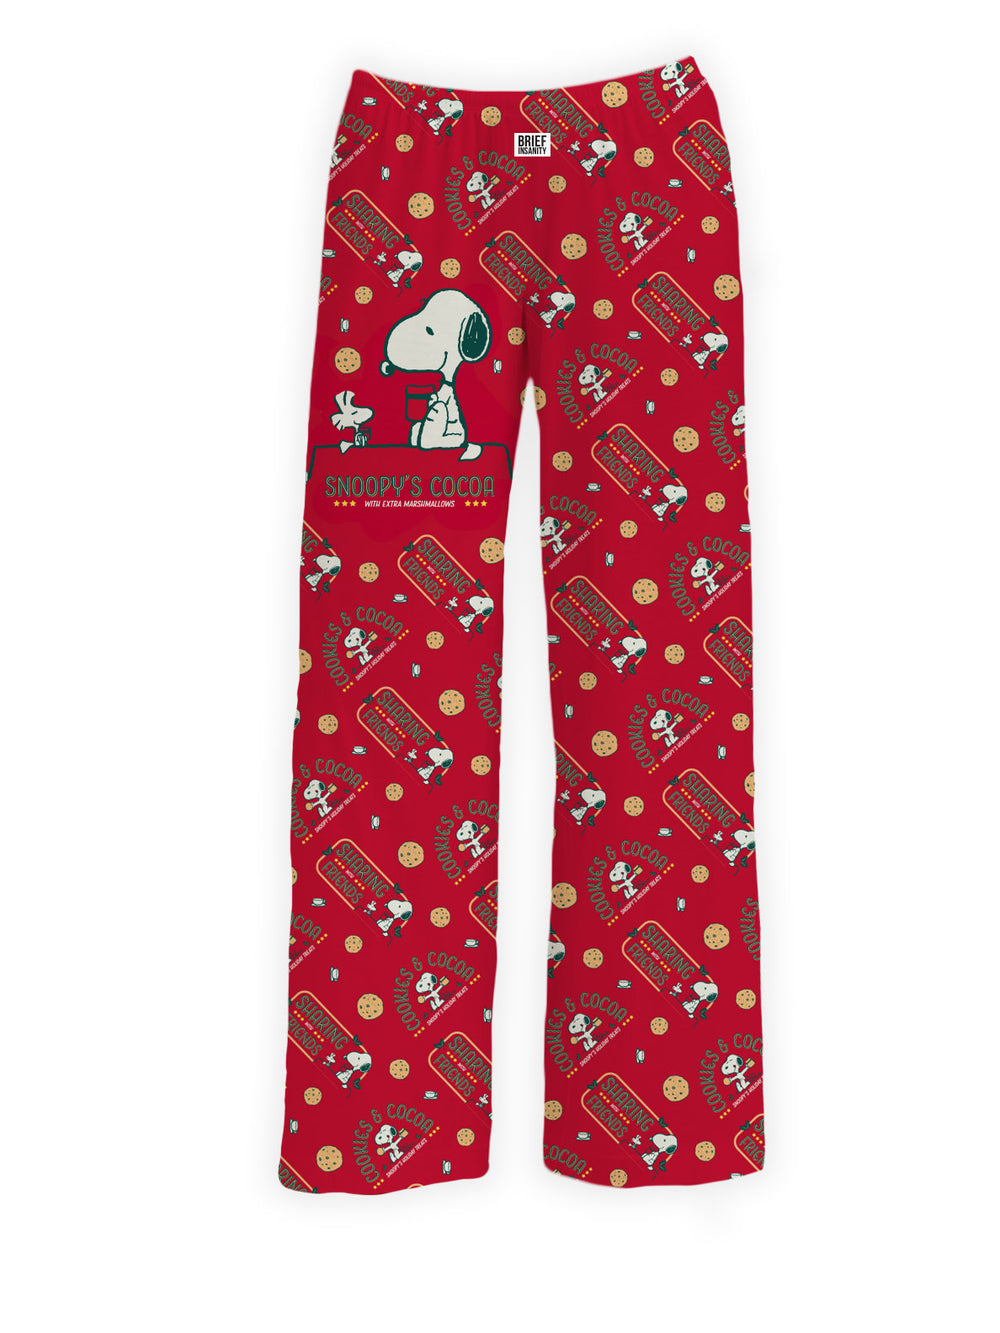 Dale's Exclusive Snoopy Cocoa Lounge Pants